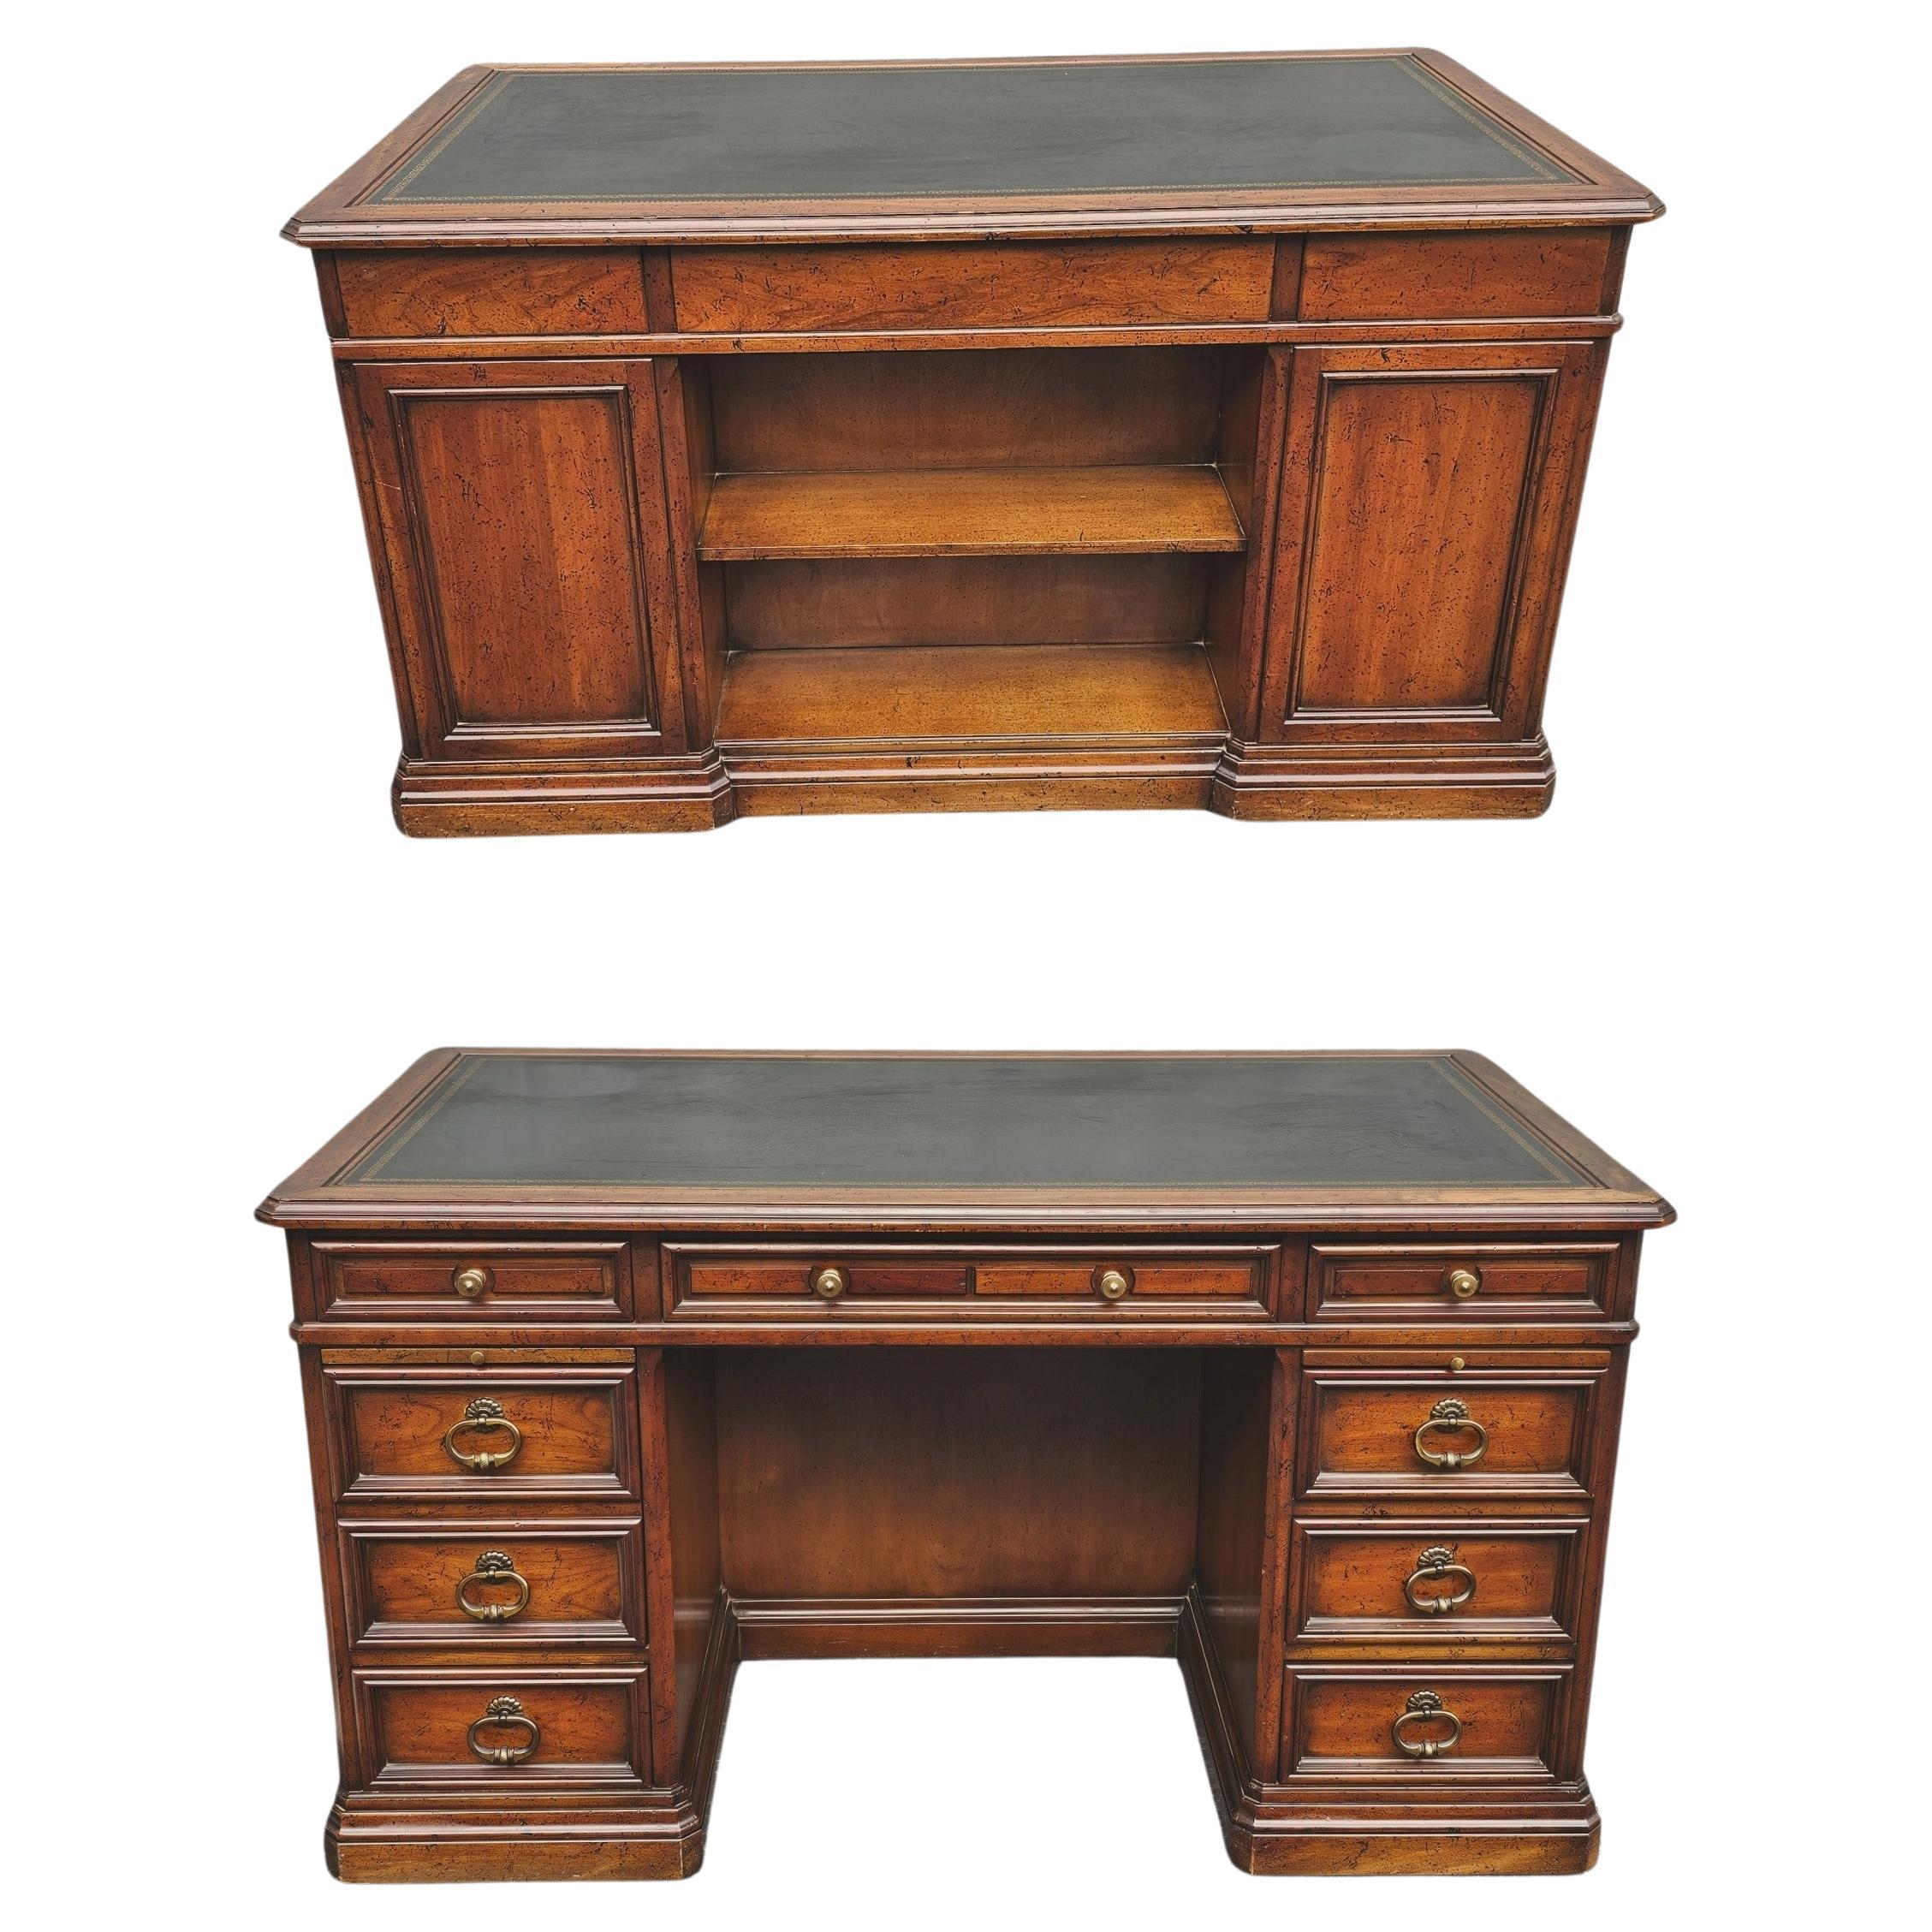 1965 Sligh Lowry Distressed Walnut and Tooled Leather Executive Desk Bookcase For Sale